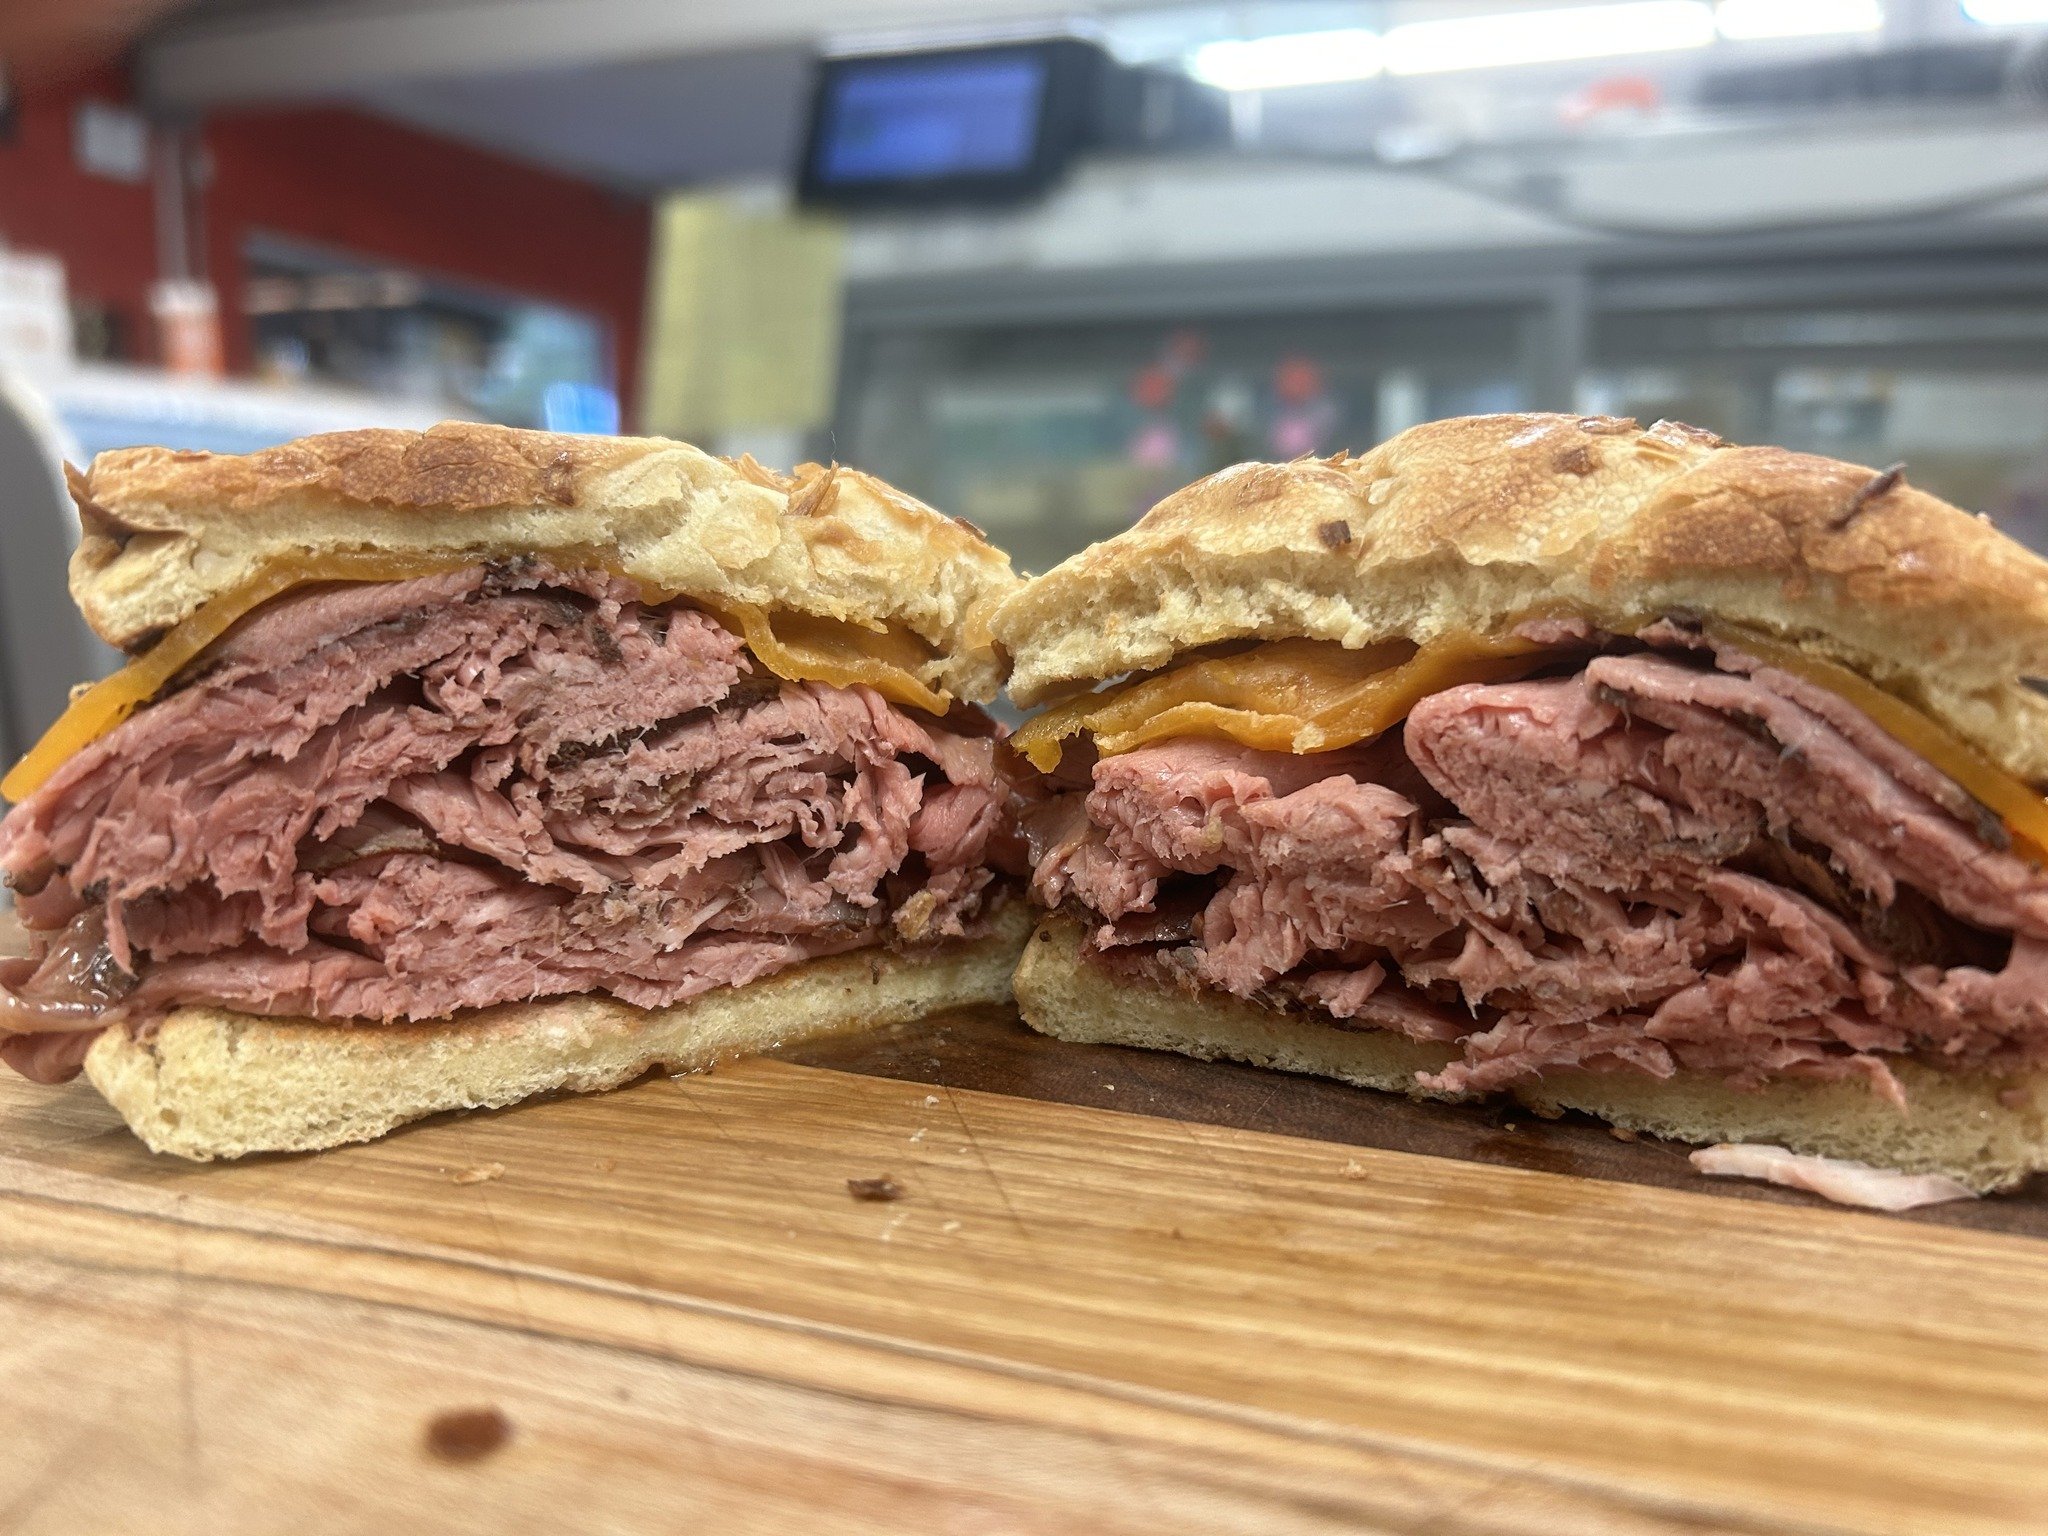 Use code STEVES355 for online orders. Spend $35 and get $5 off!
Valid until Friday at Steve's in Hillsborough ONLY.

Try the WEEKLY SANDWICH SPECIAL: Steve&rsquo;s Cheddar and Roast Beef
Slow Roasted and Marinated Roast Beef, Melted Cheddar and Zing 